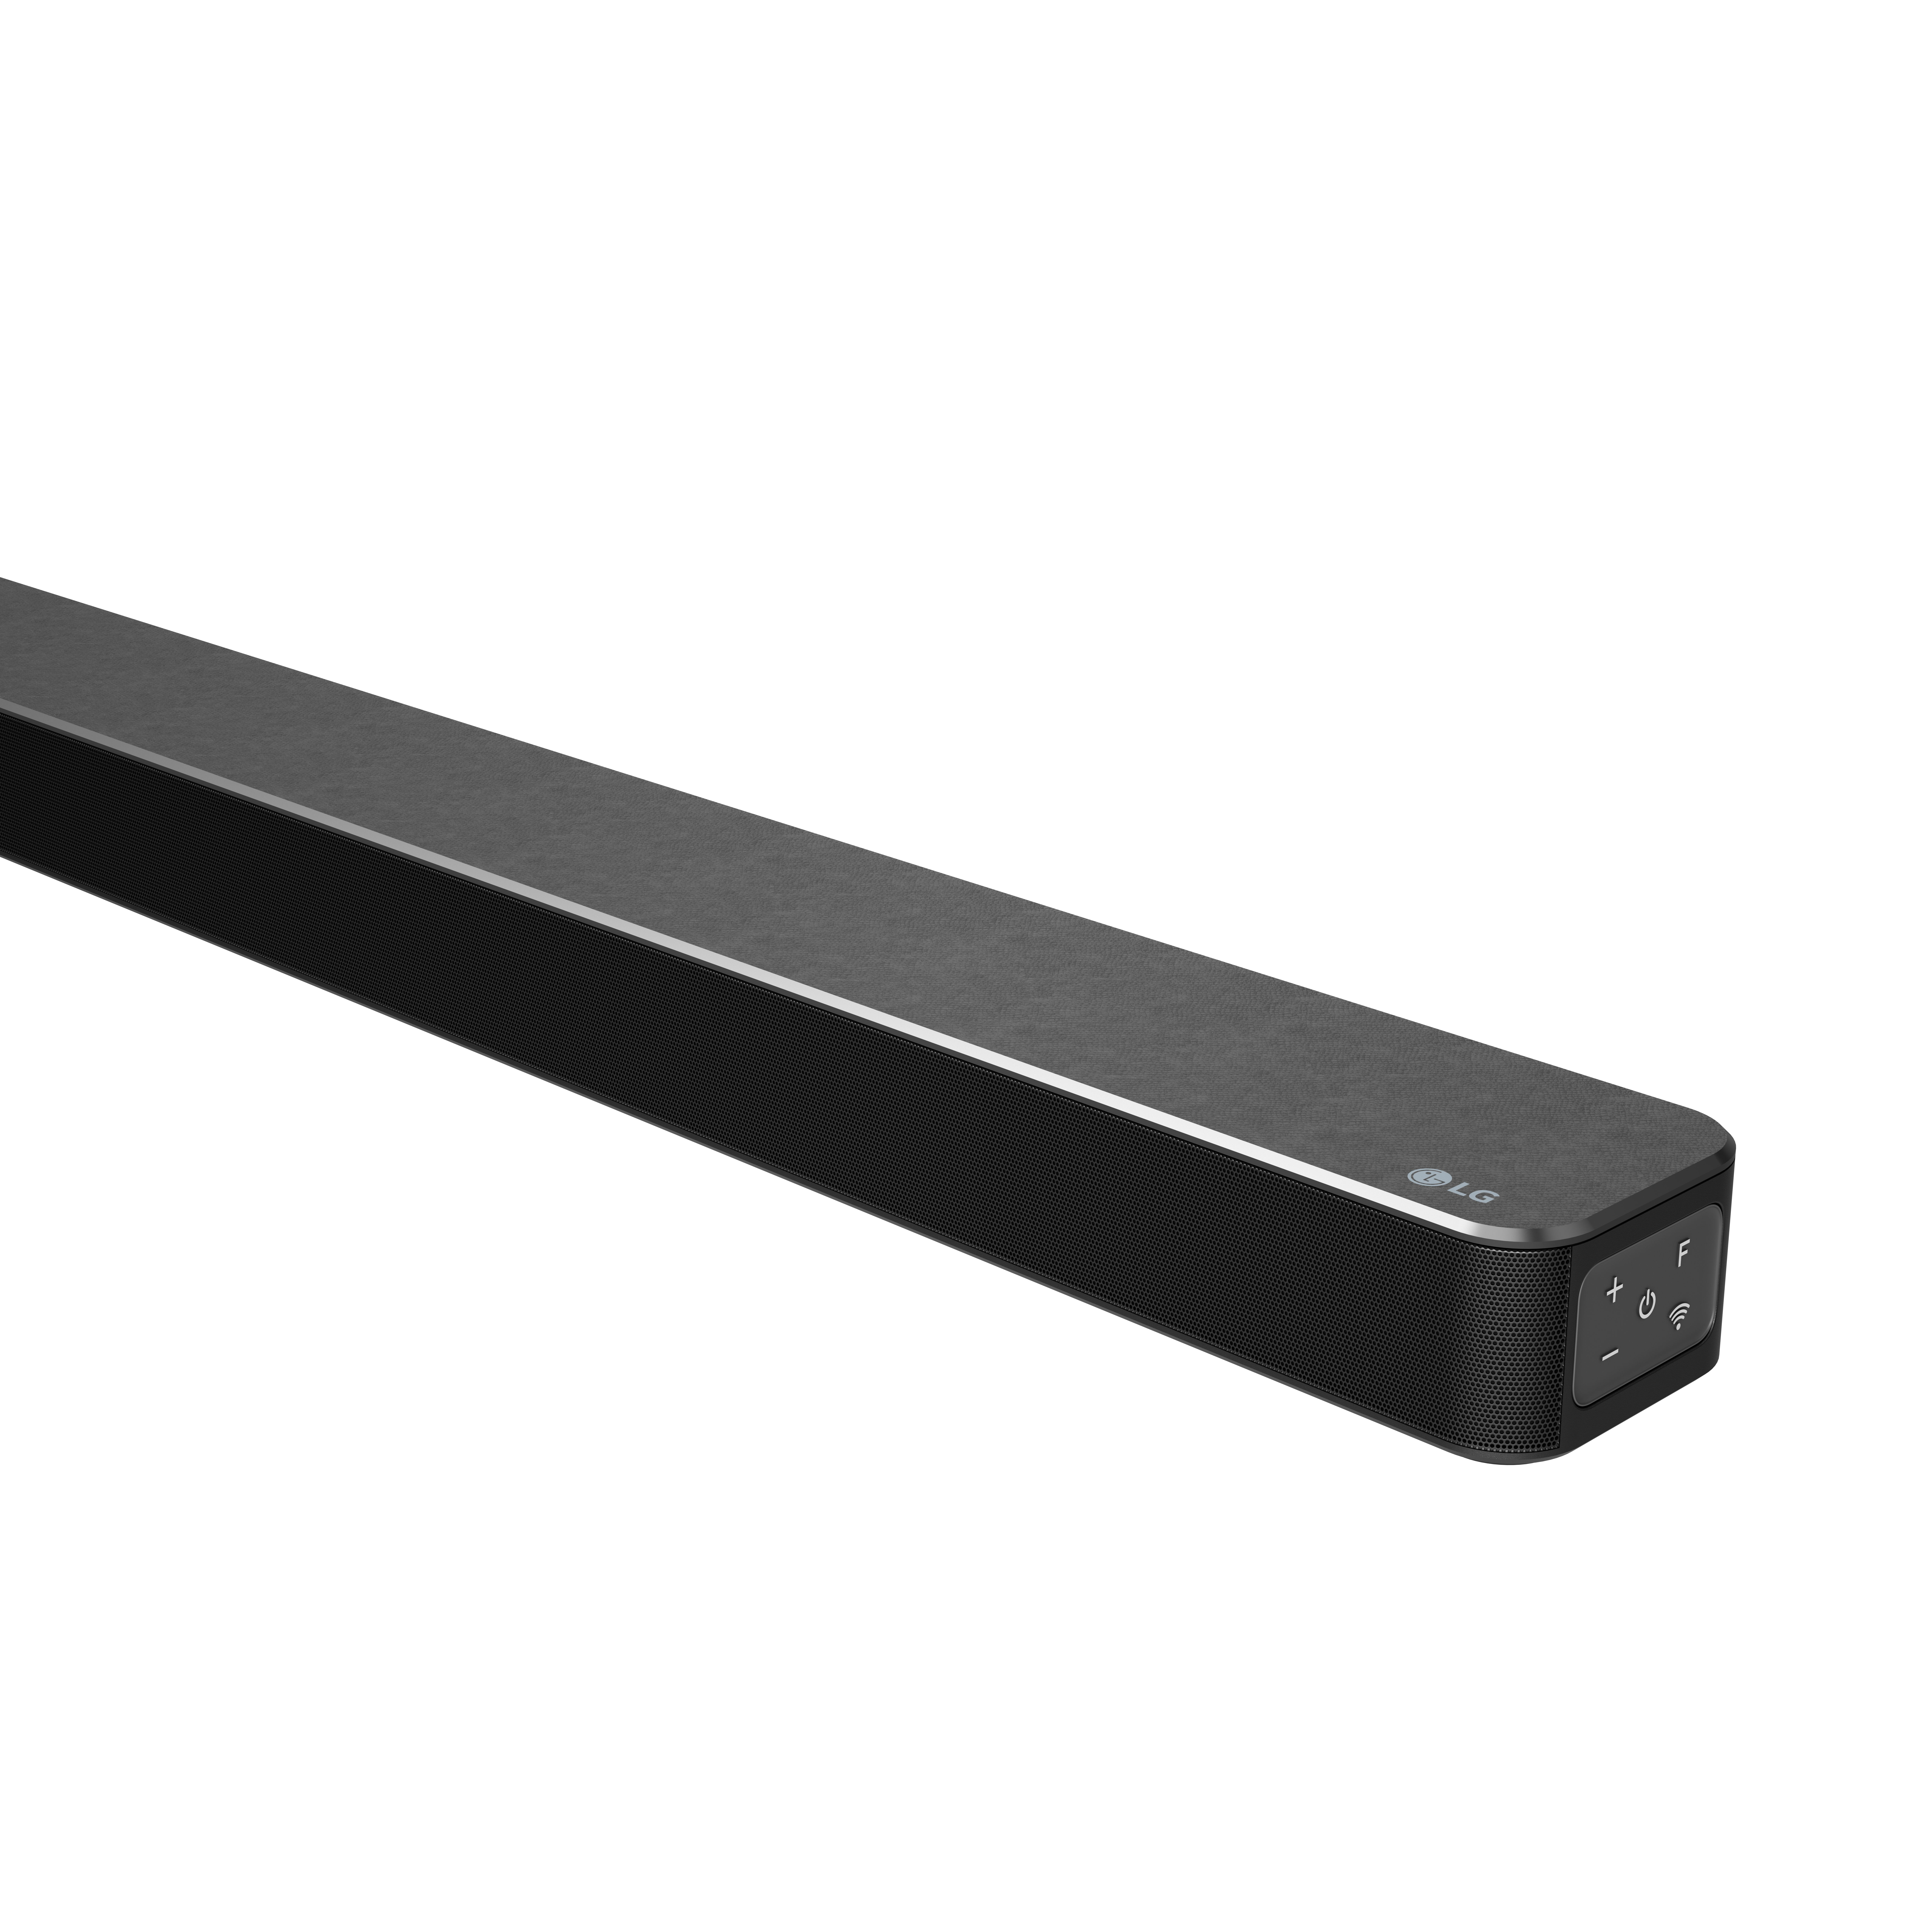 LG 3.1 Channel High Res Audio Sound Bar with DTS Virtual:X - SN6Y - image 5 of 19